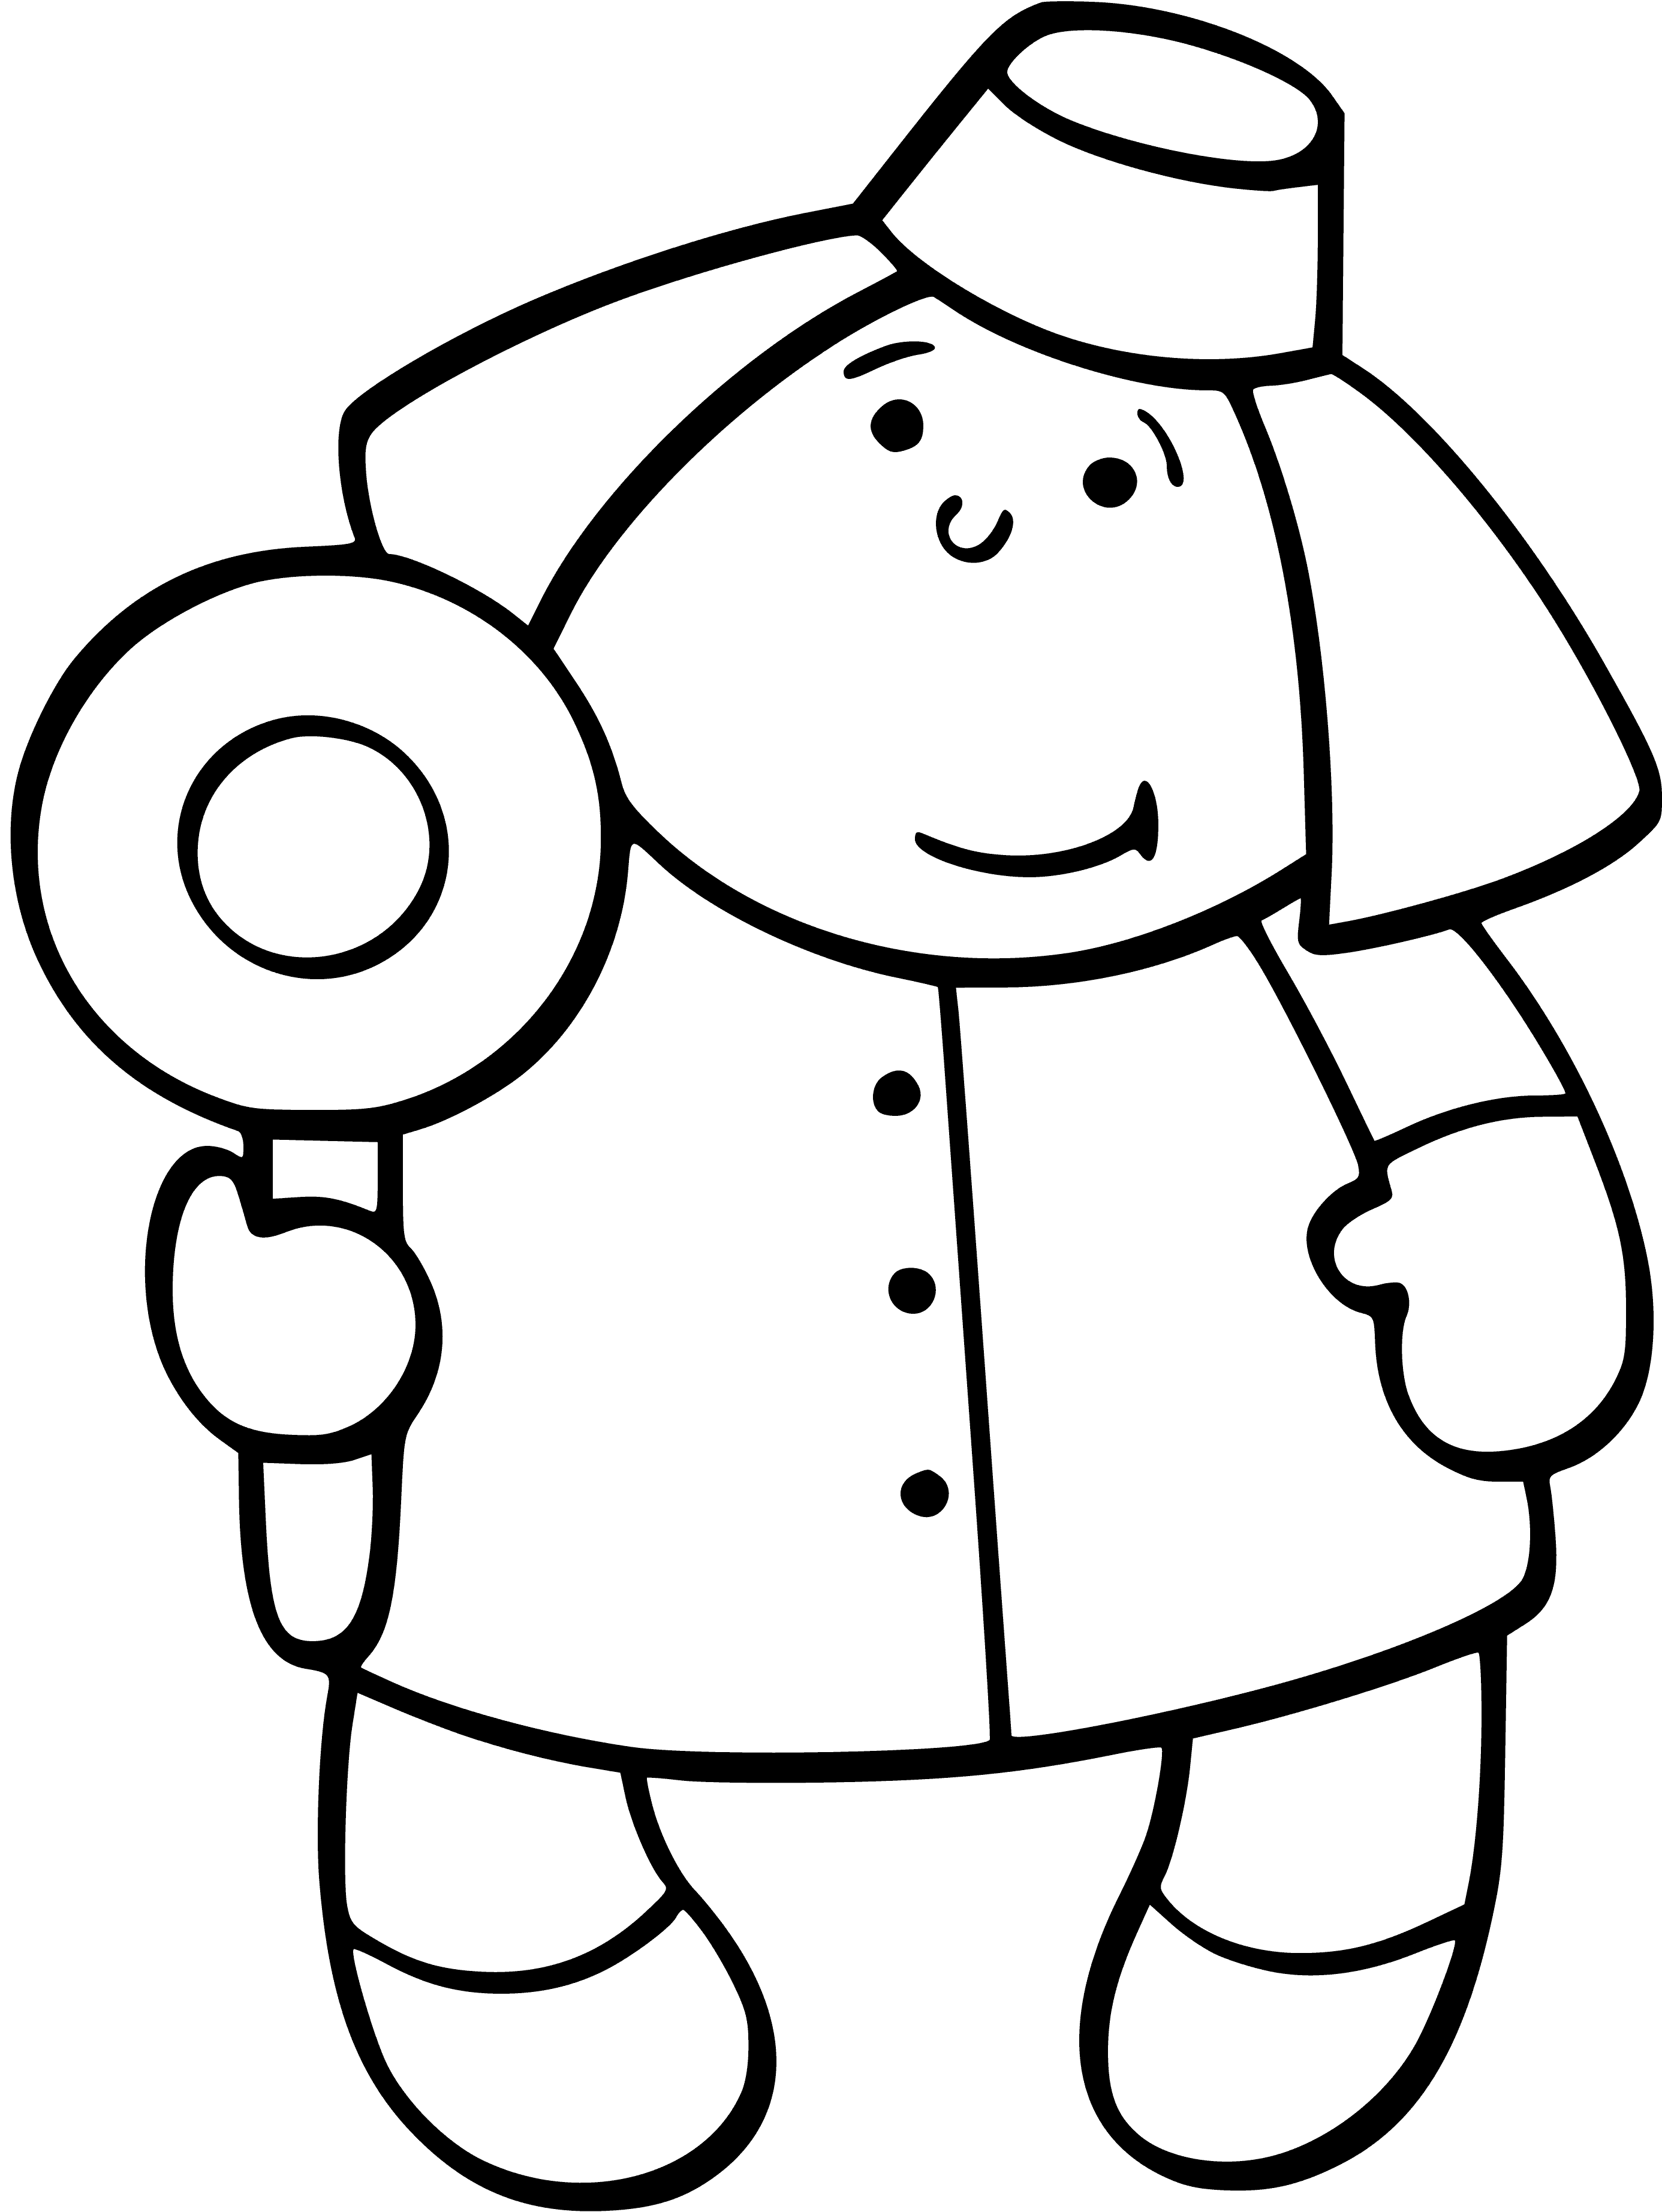 coloring page: Person in white coat and mask holds silver tool beneath a light, looking to fix or create something.